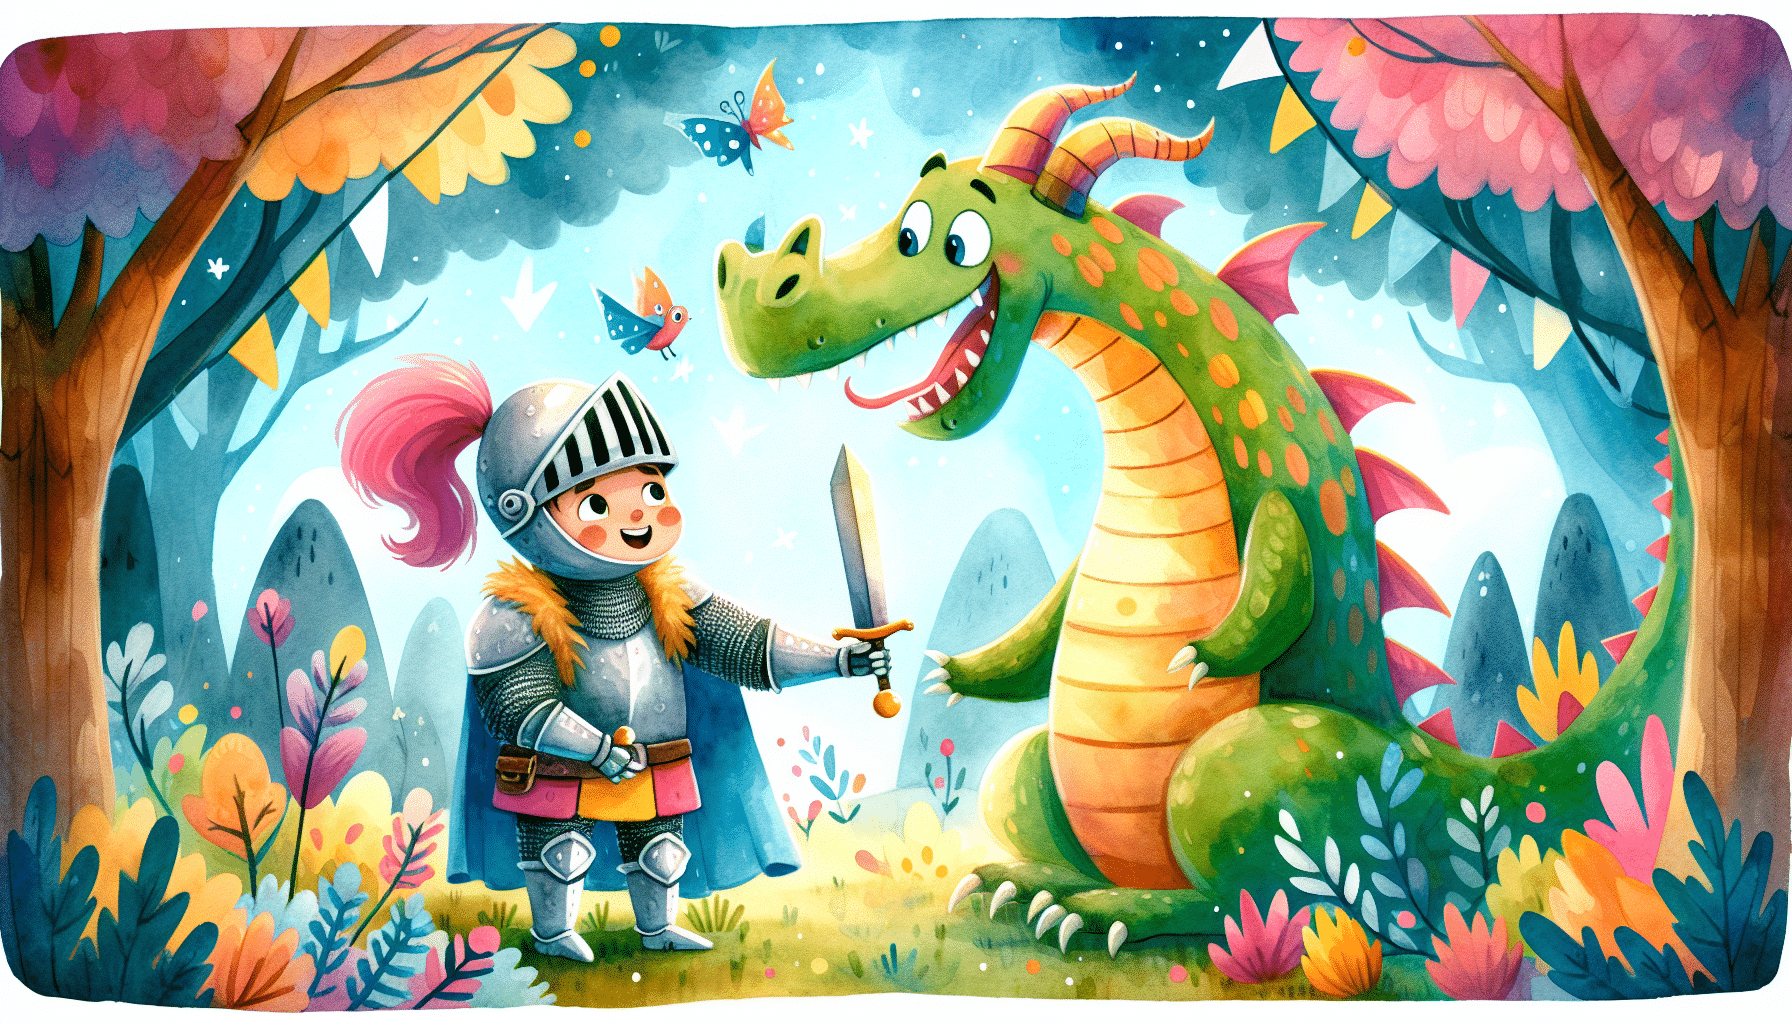 The Brave Knight and the Friendly Dragon